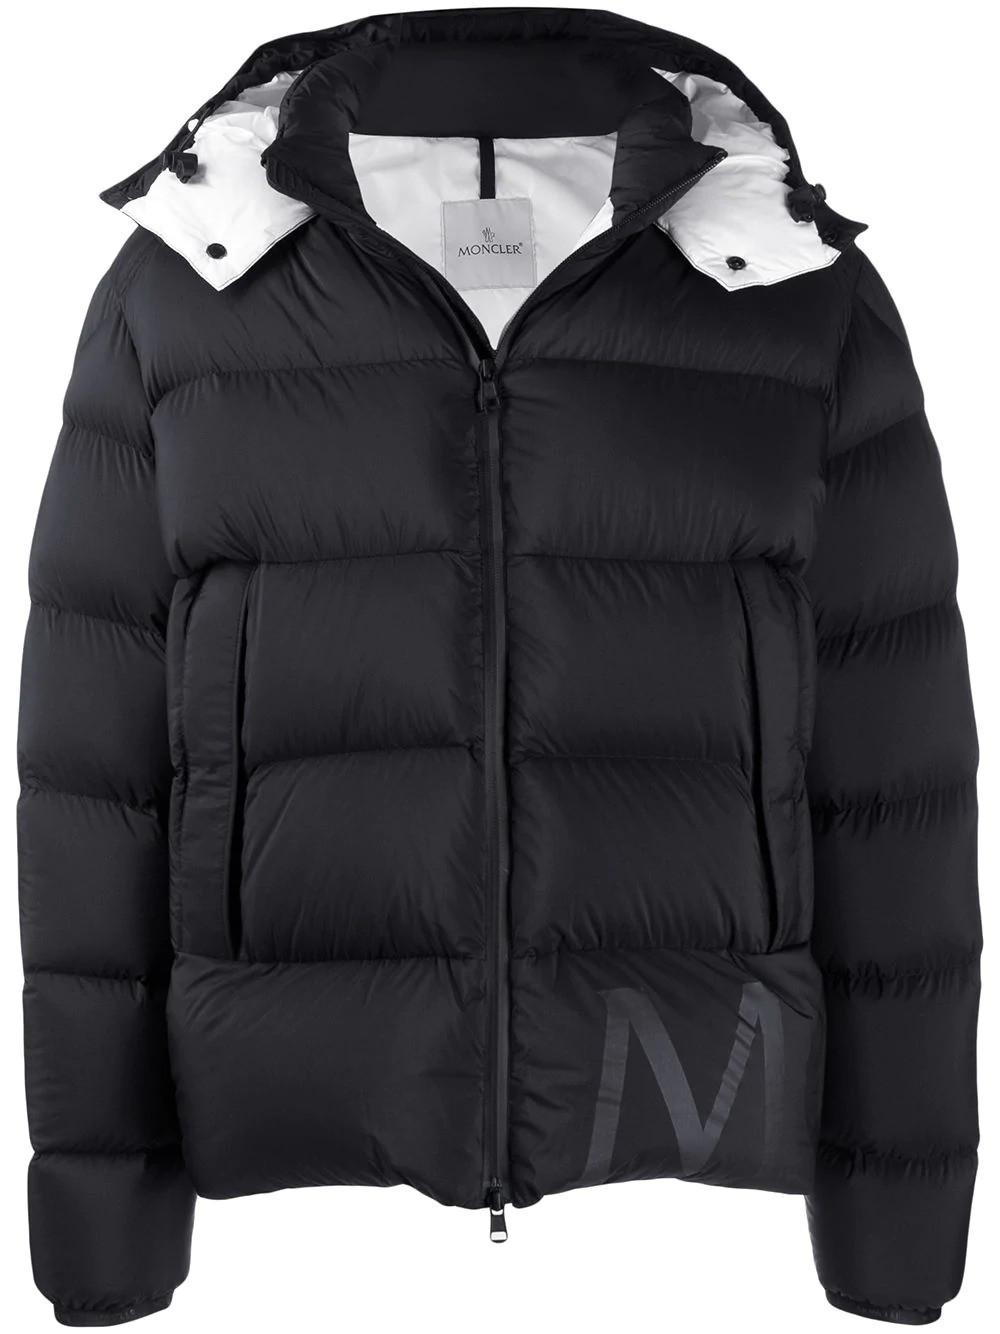 Moncler Synthetic Wilms Jacket in Black for Men - Lyst